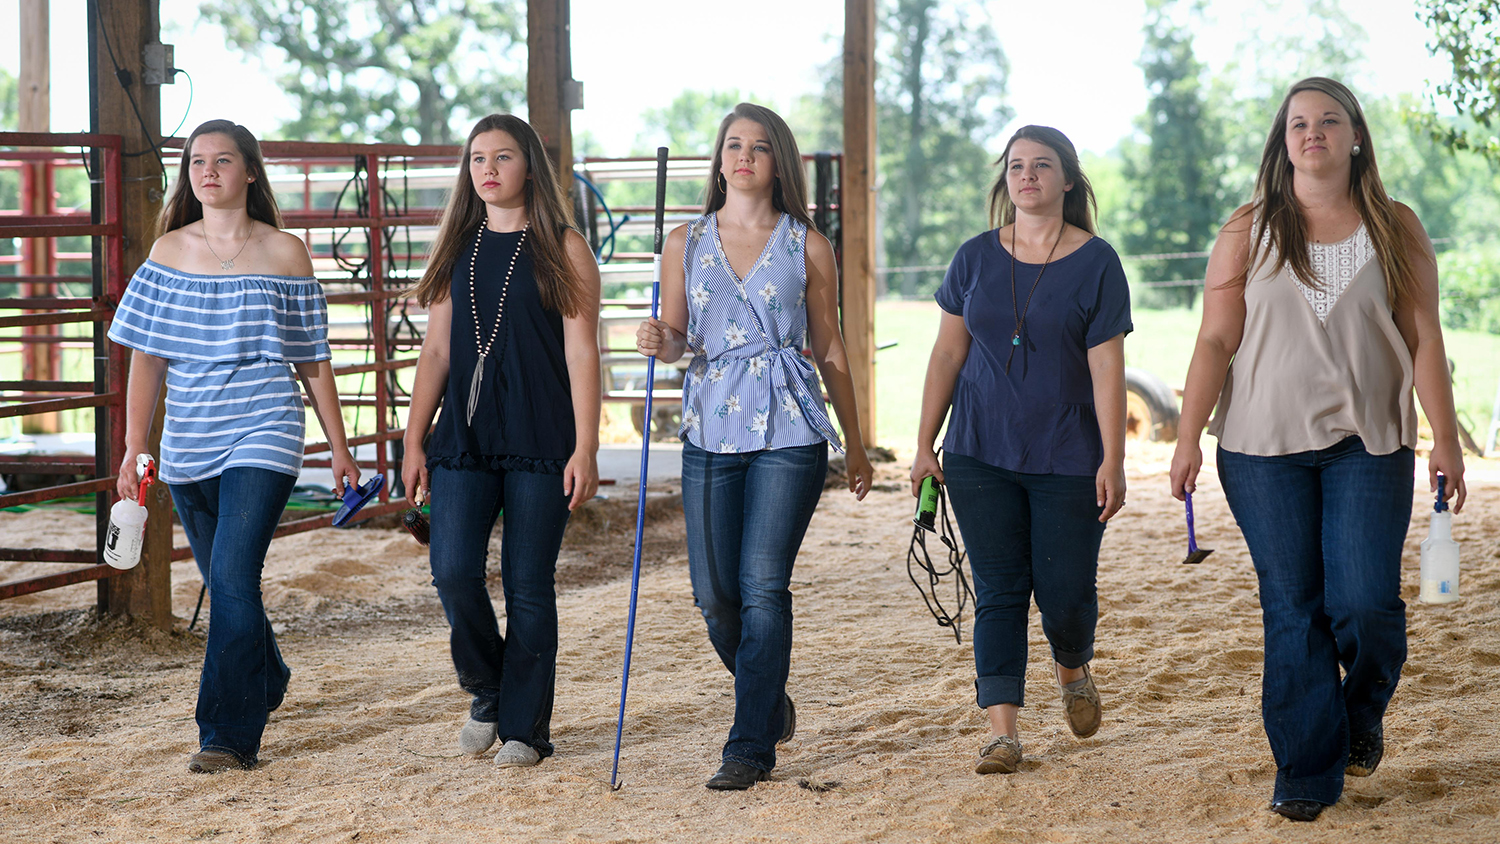 CALS graduates the Harward Sisters have their own cattle business.